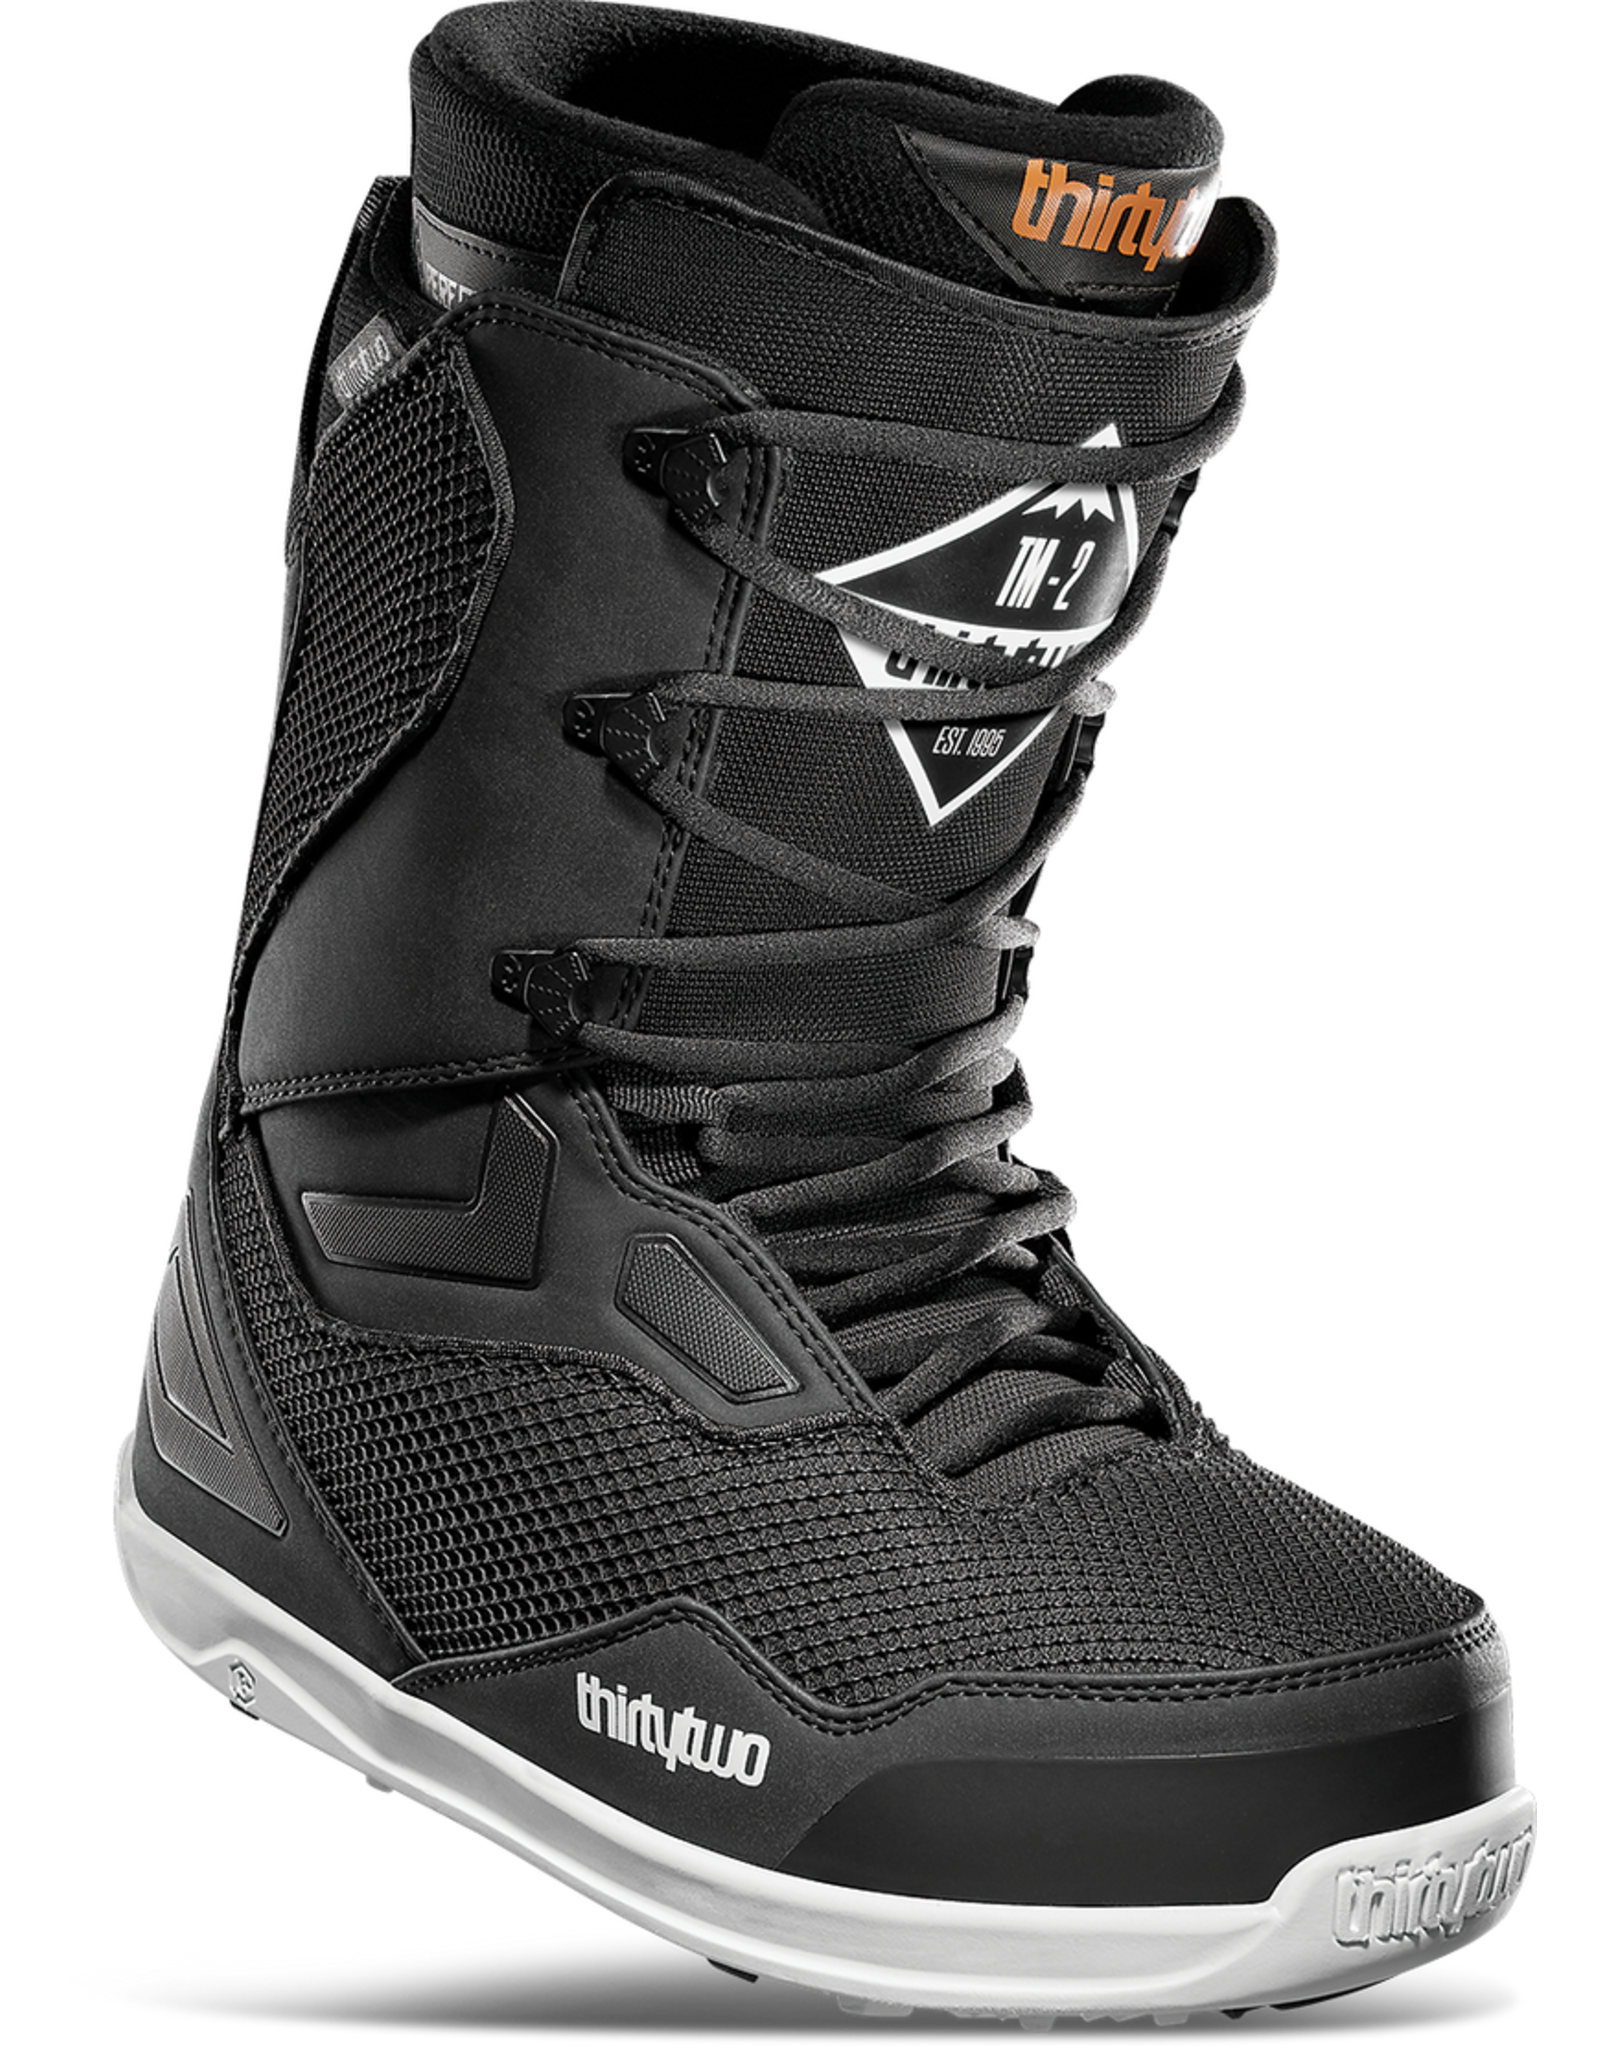 ThirtyTwo TM-2 Lace Wide - 11.0